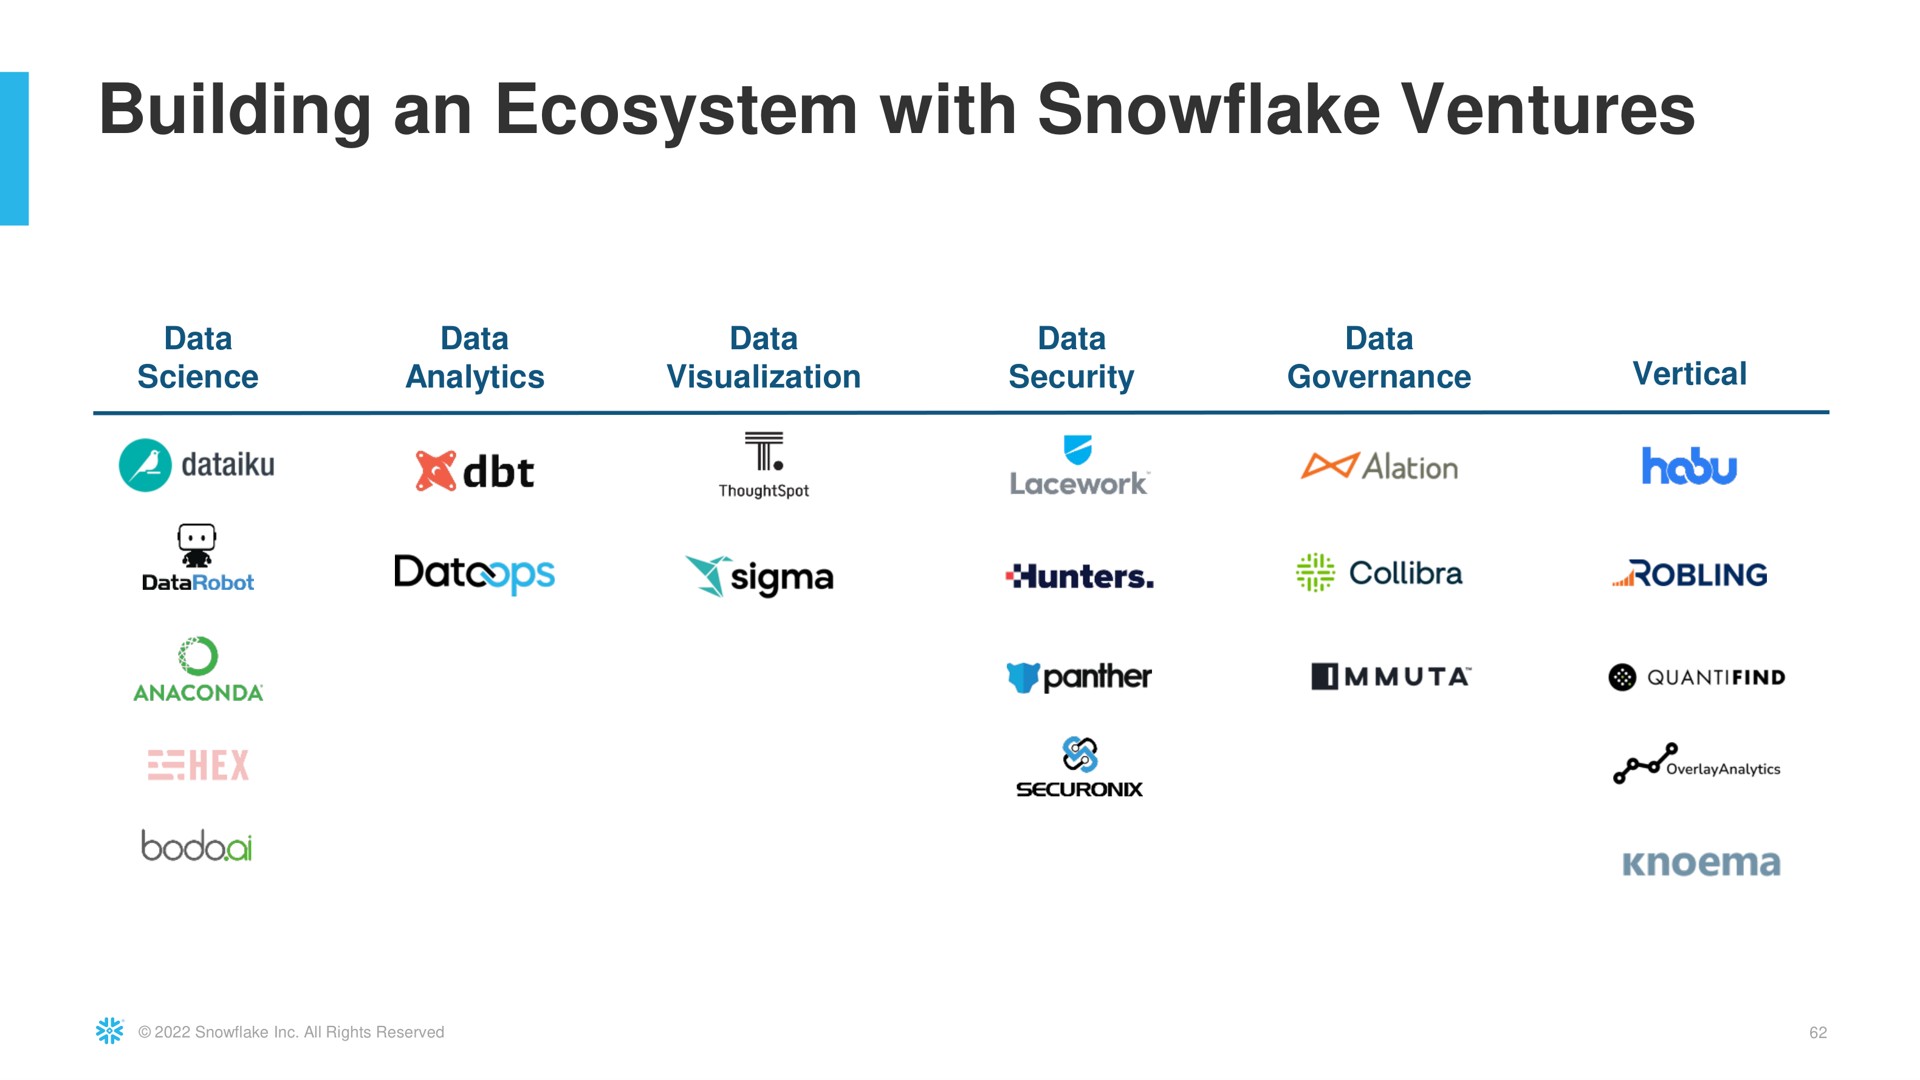 building an ecosystem with snowflake ventures | Snowflake